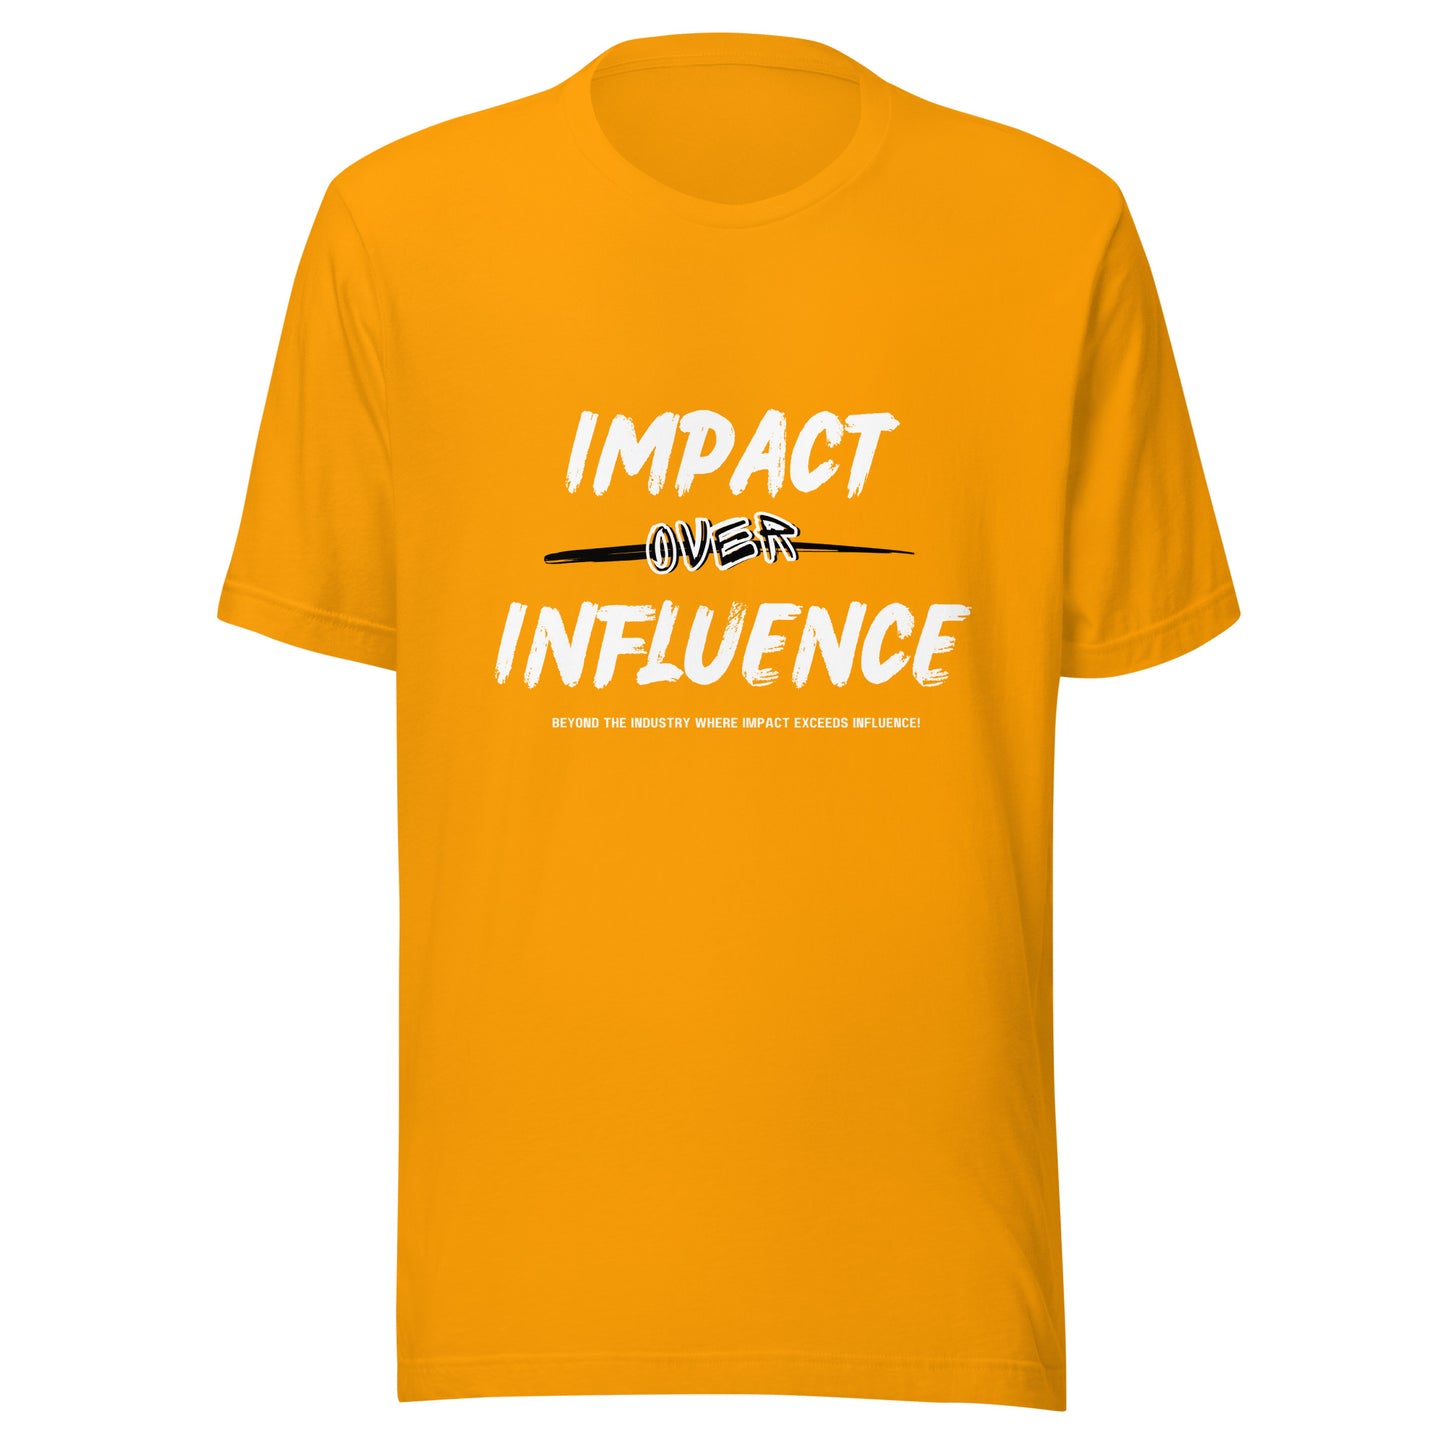 IMPACT OVER INFLUENCE